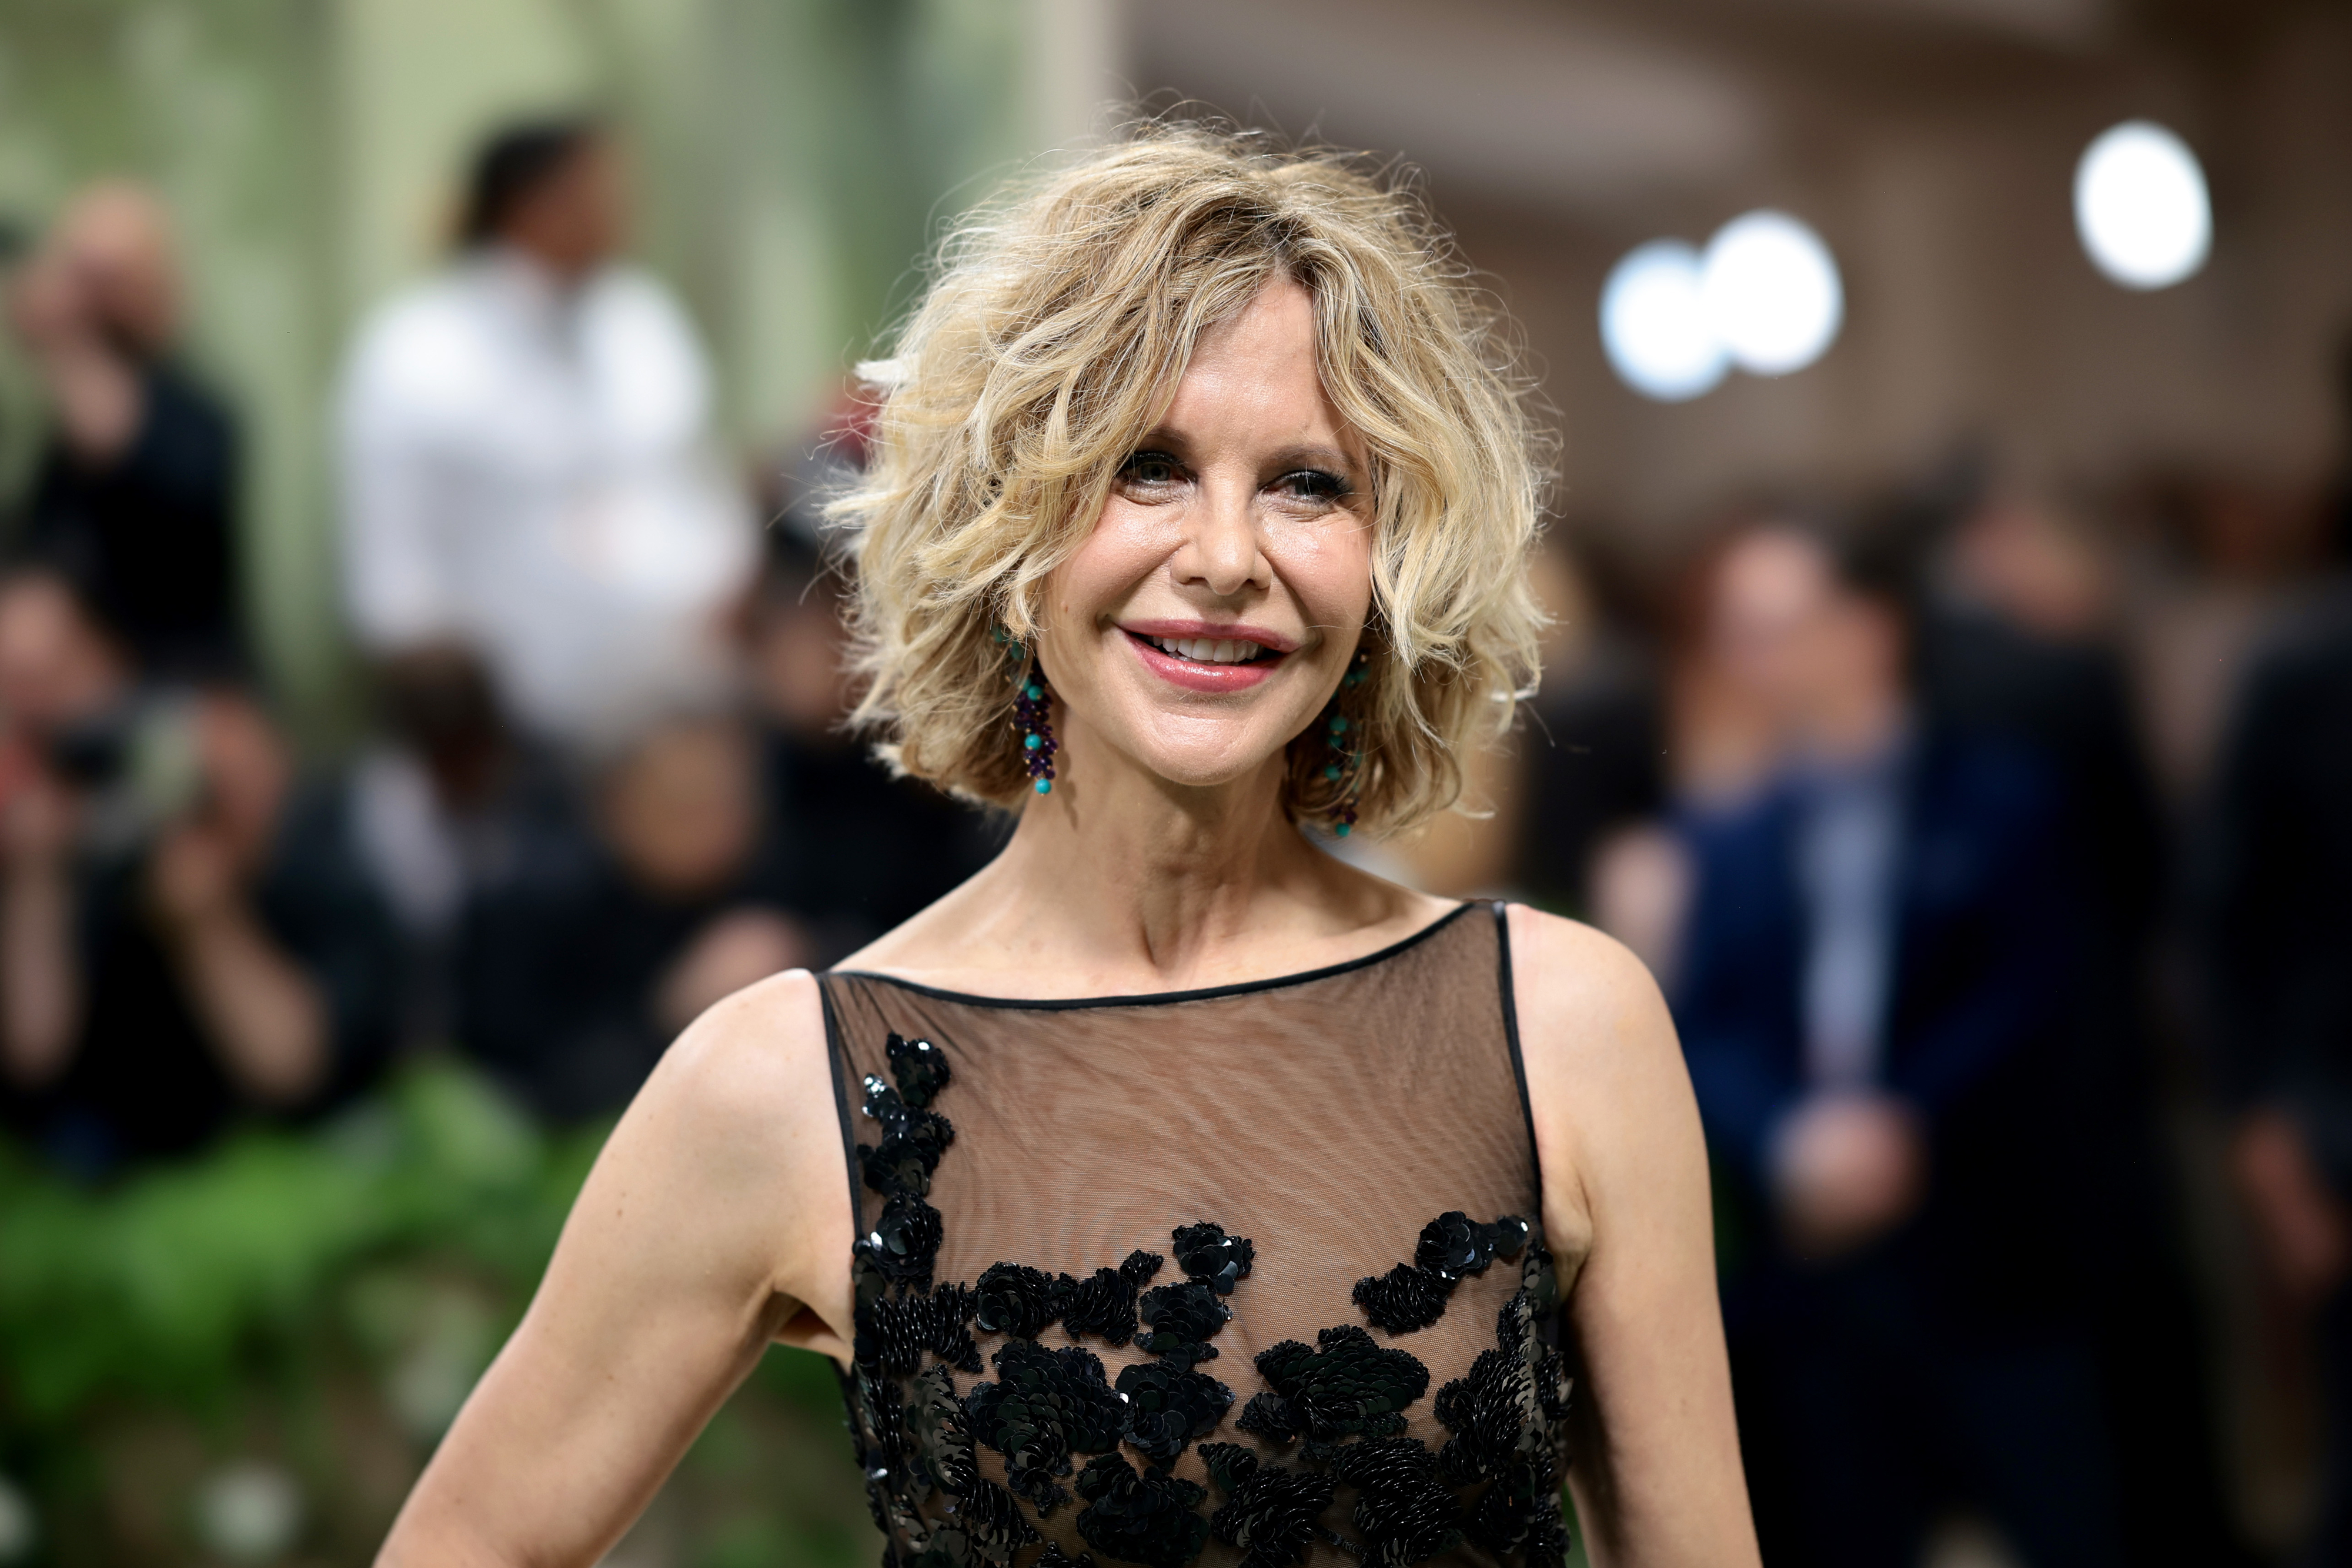 Meg Ryan smiling on the red carpet, wearing a sheer black dress with floral detailing